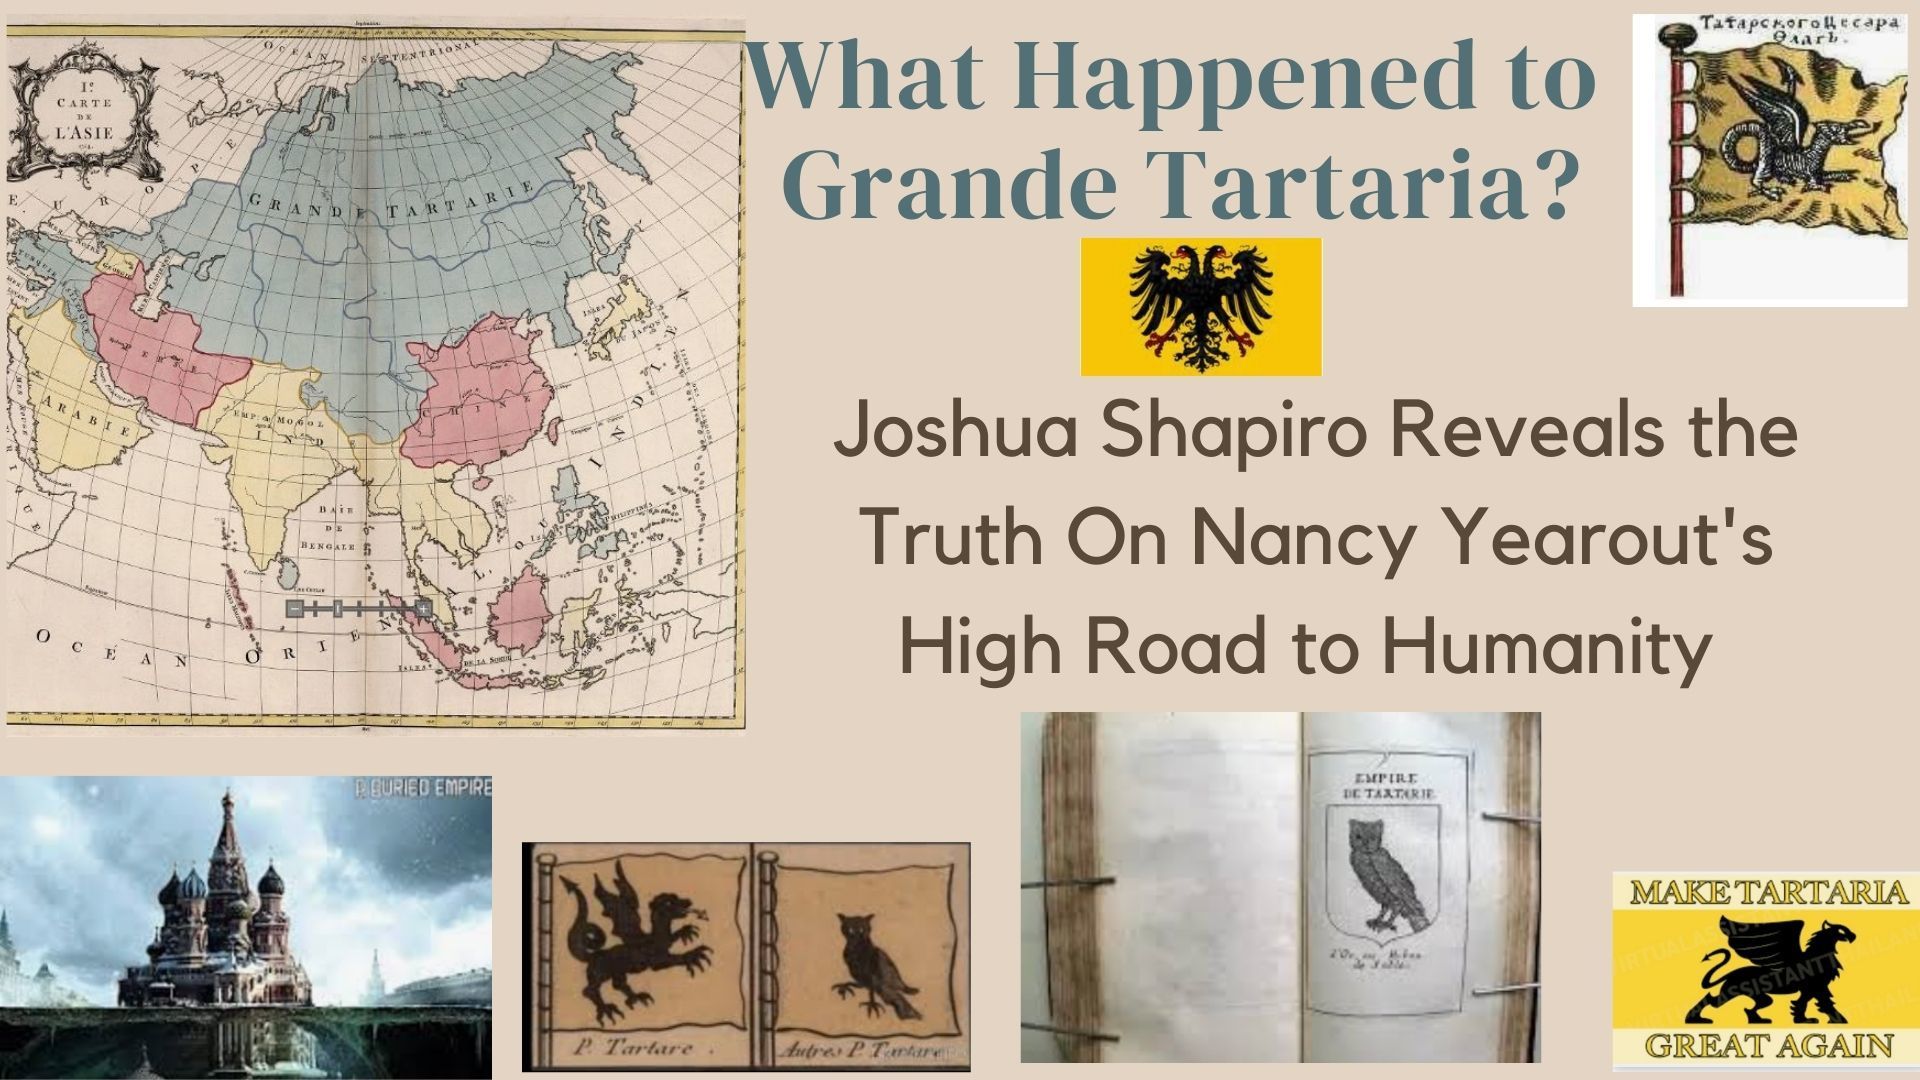 Tartaria The Hidden Country That Gave Us Free Energy! Truth Revealed by Joshua Shapiro